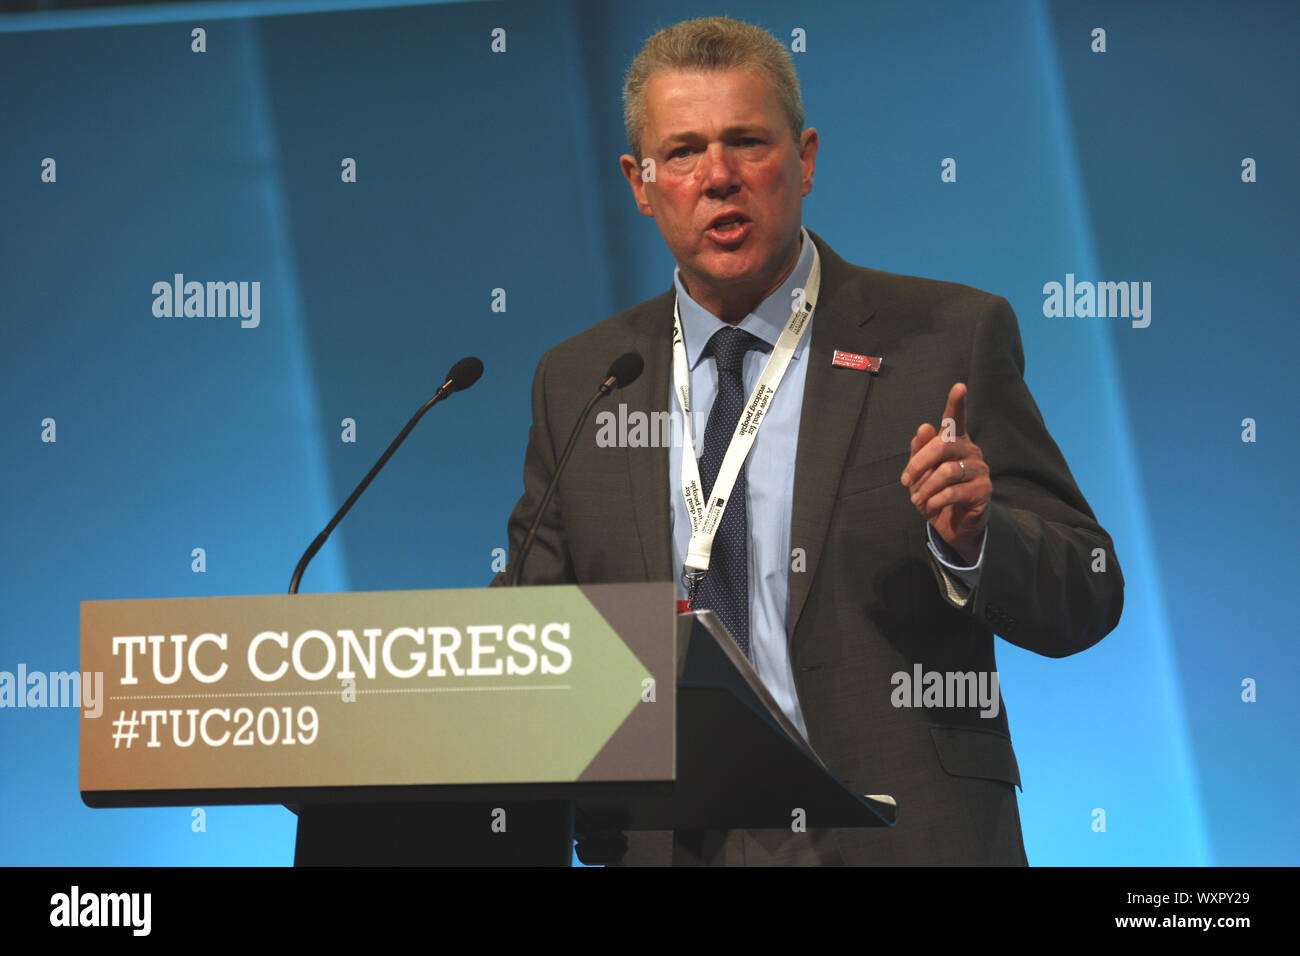 Brighton, UK, 8th September 2019 - Mark Serwotka, General Secretary of the Public & Commercial Service Union  (PCS) gives his speech at TUC Congress Stock Photo